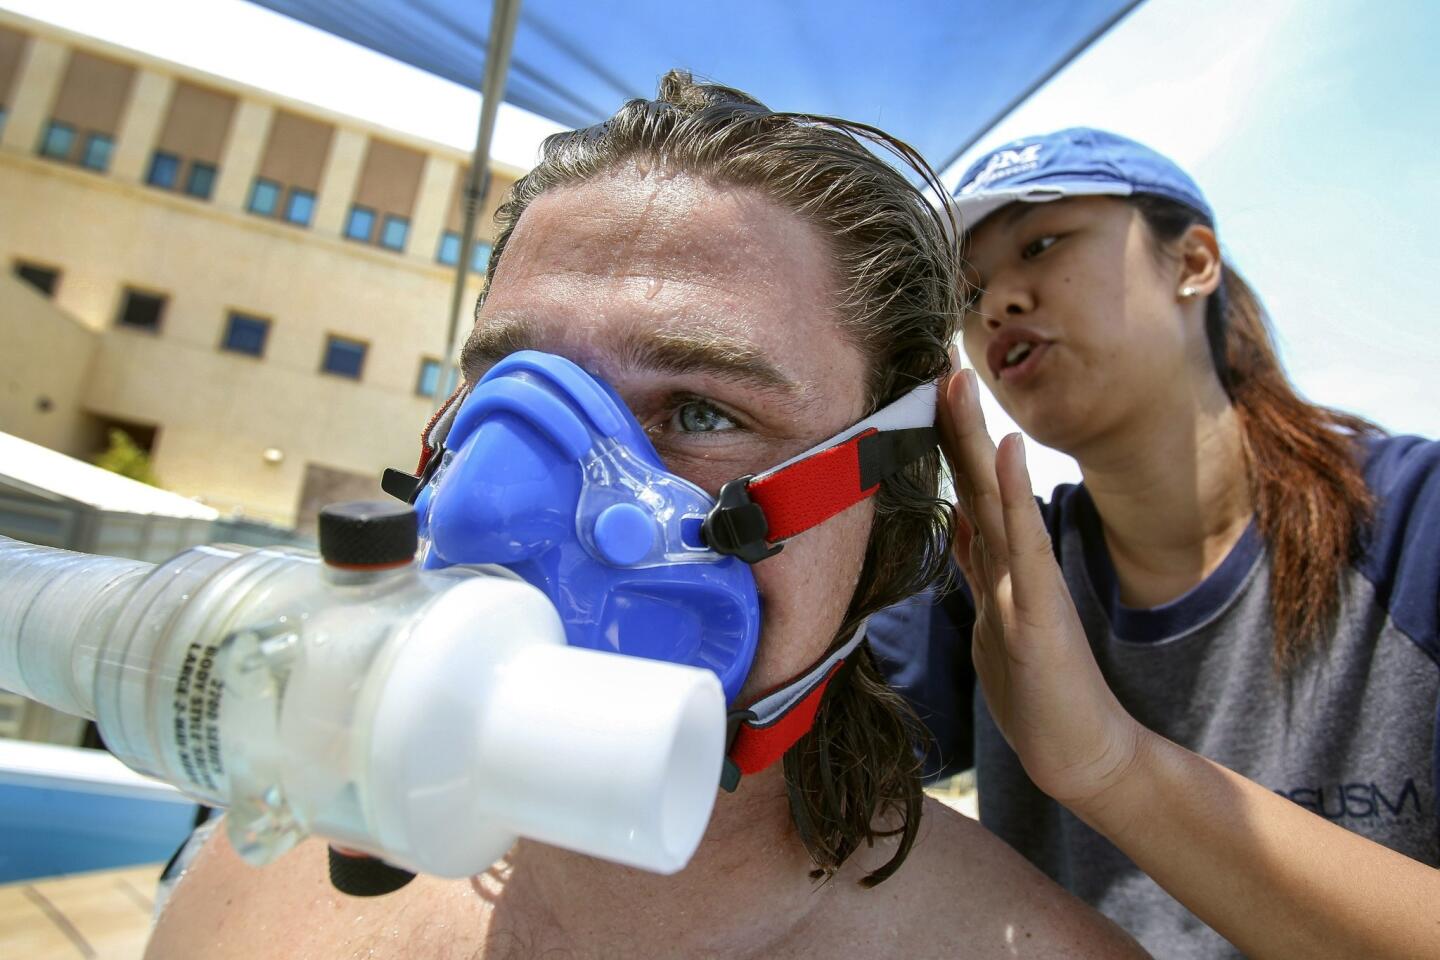 Kinesiology intern Ning Jia, 25, puts a mask, used to measure oxygen consumption, on fellow intern and student Cody Cuchna, 24, before he paddles a surfboard in a swim flume.